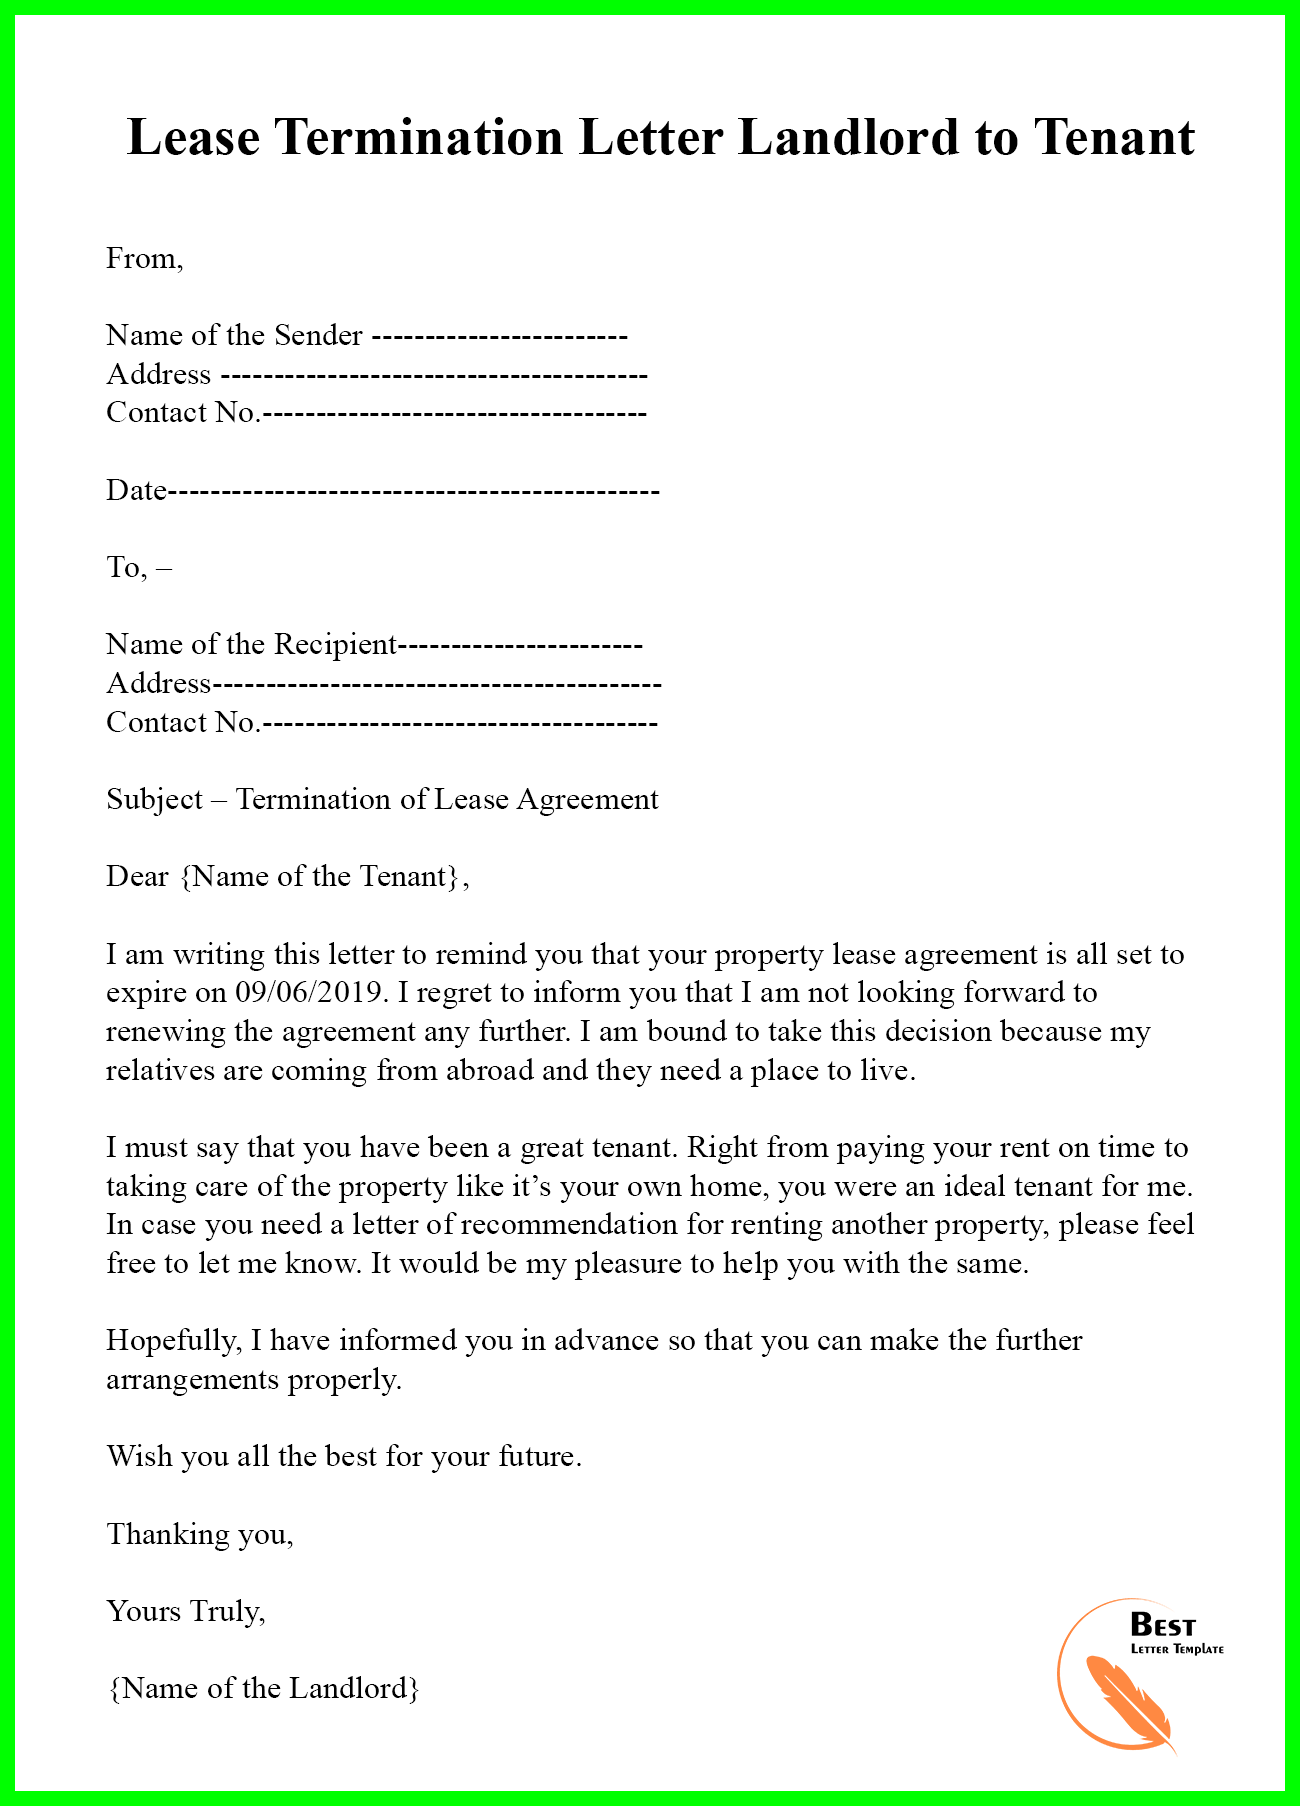 Sample Letter Of Landlord To Tenant Terminating Lease from bestlettertemplate.com